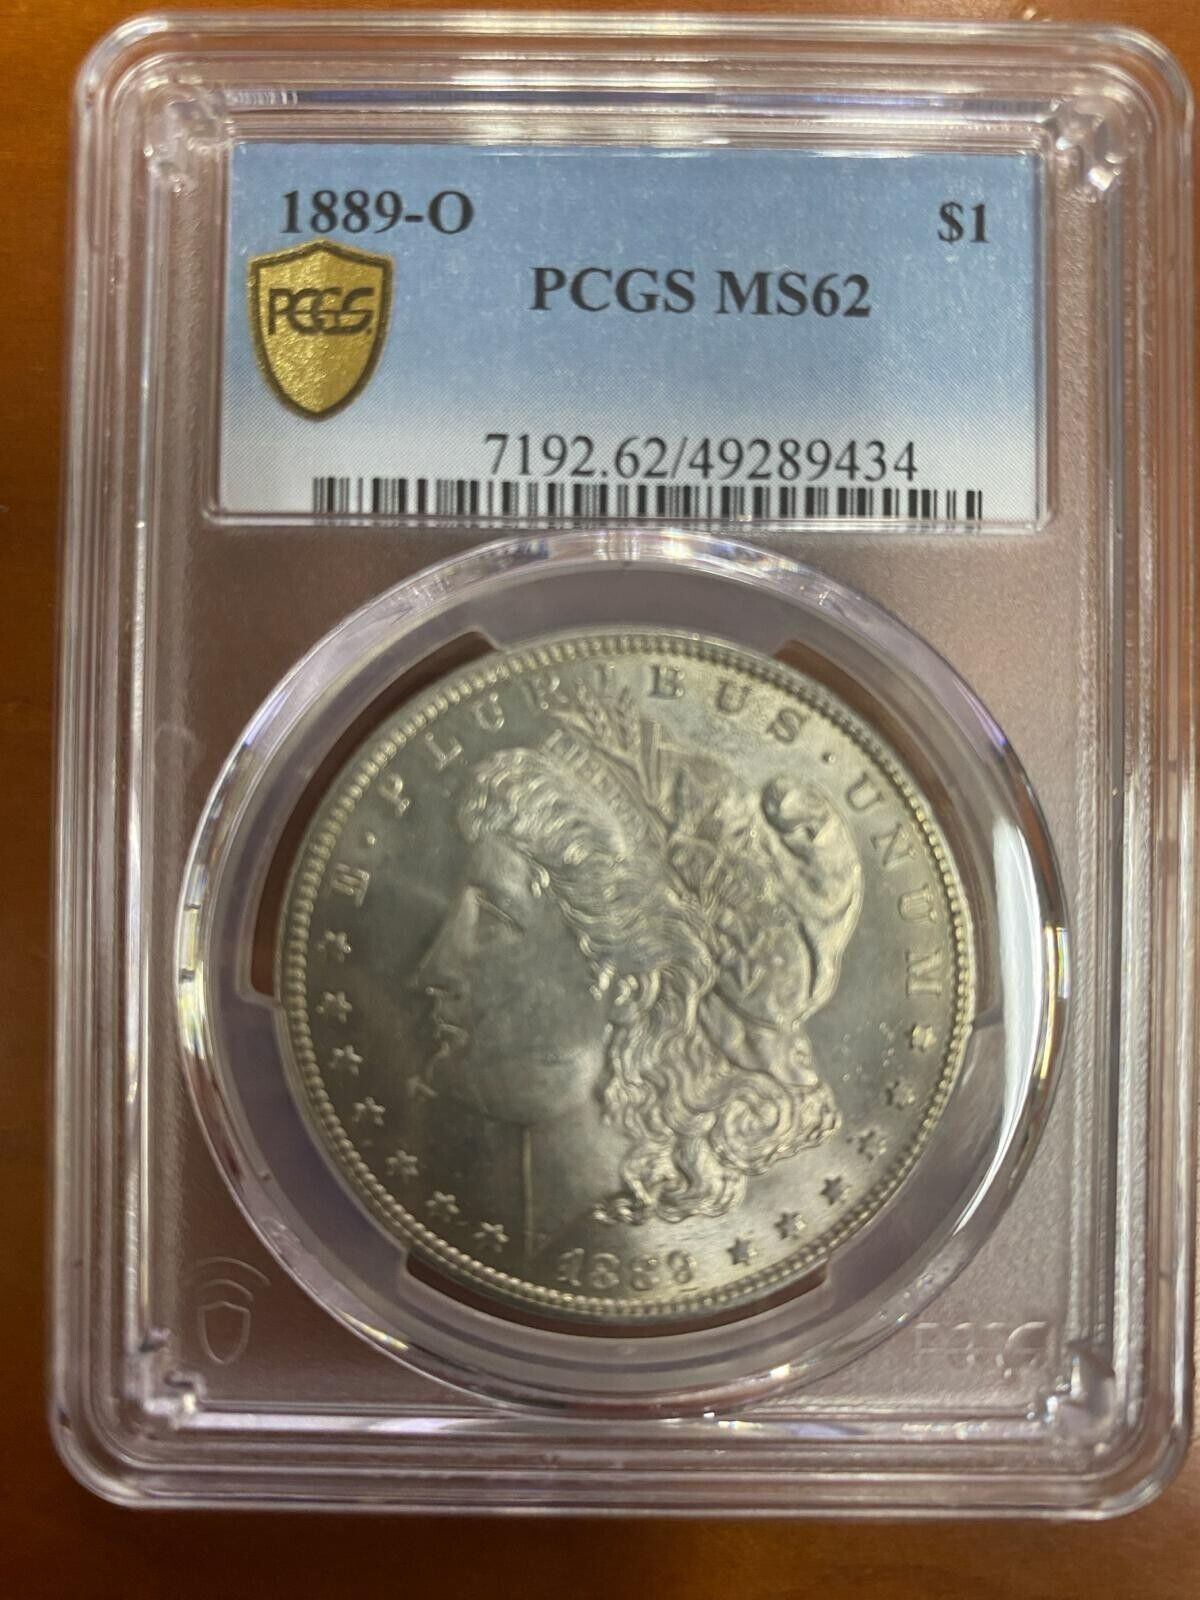 Primary image for 1889-O $1 Silver Morgan Dollar Graded by PCGS as MS-62